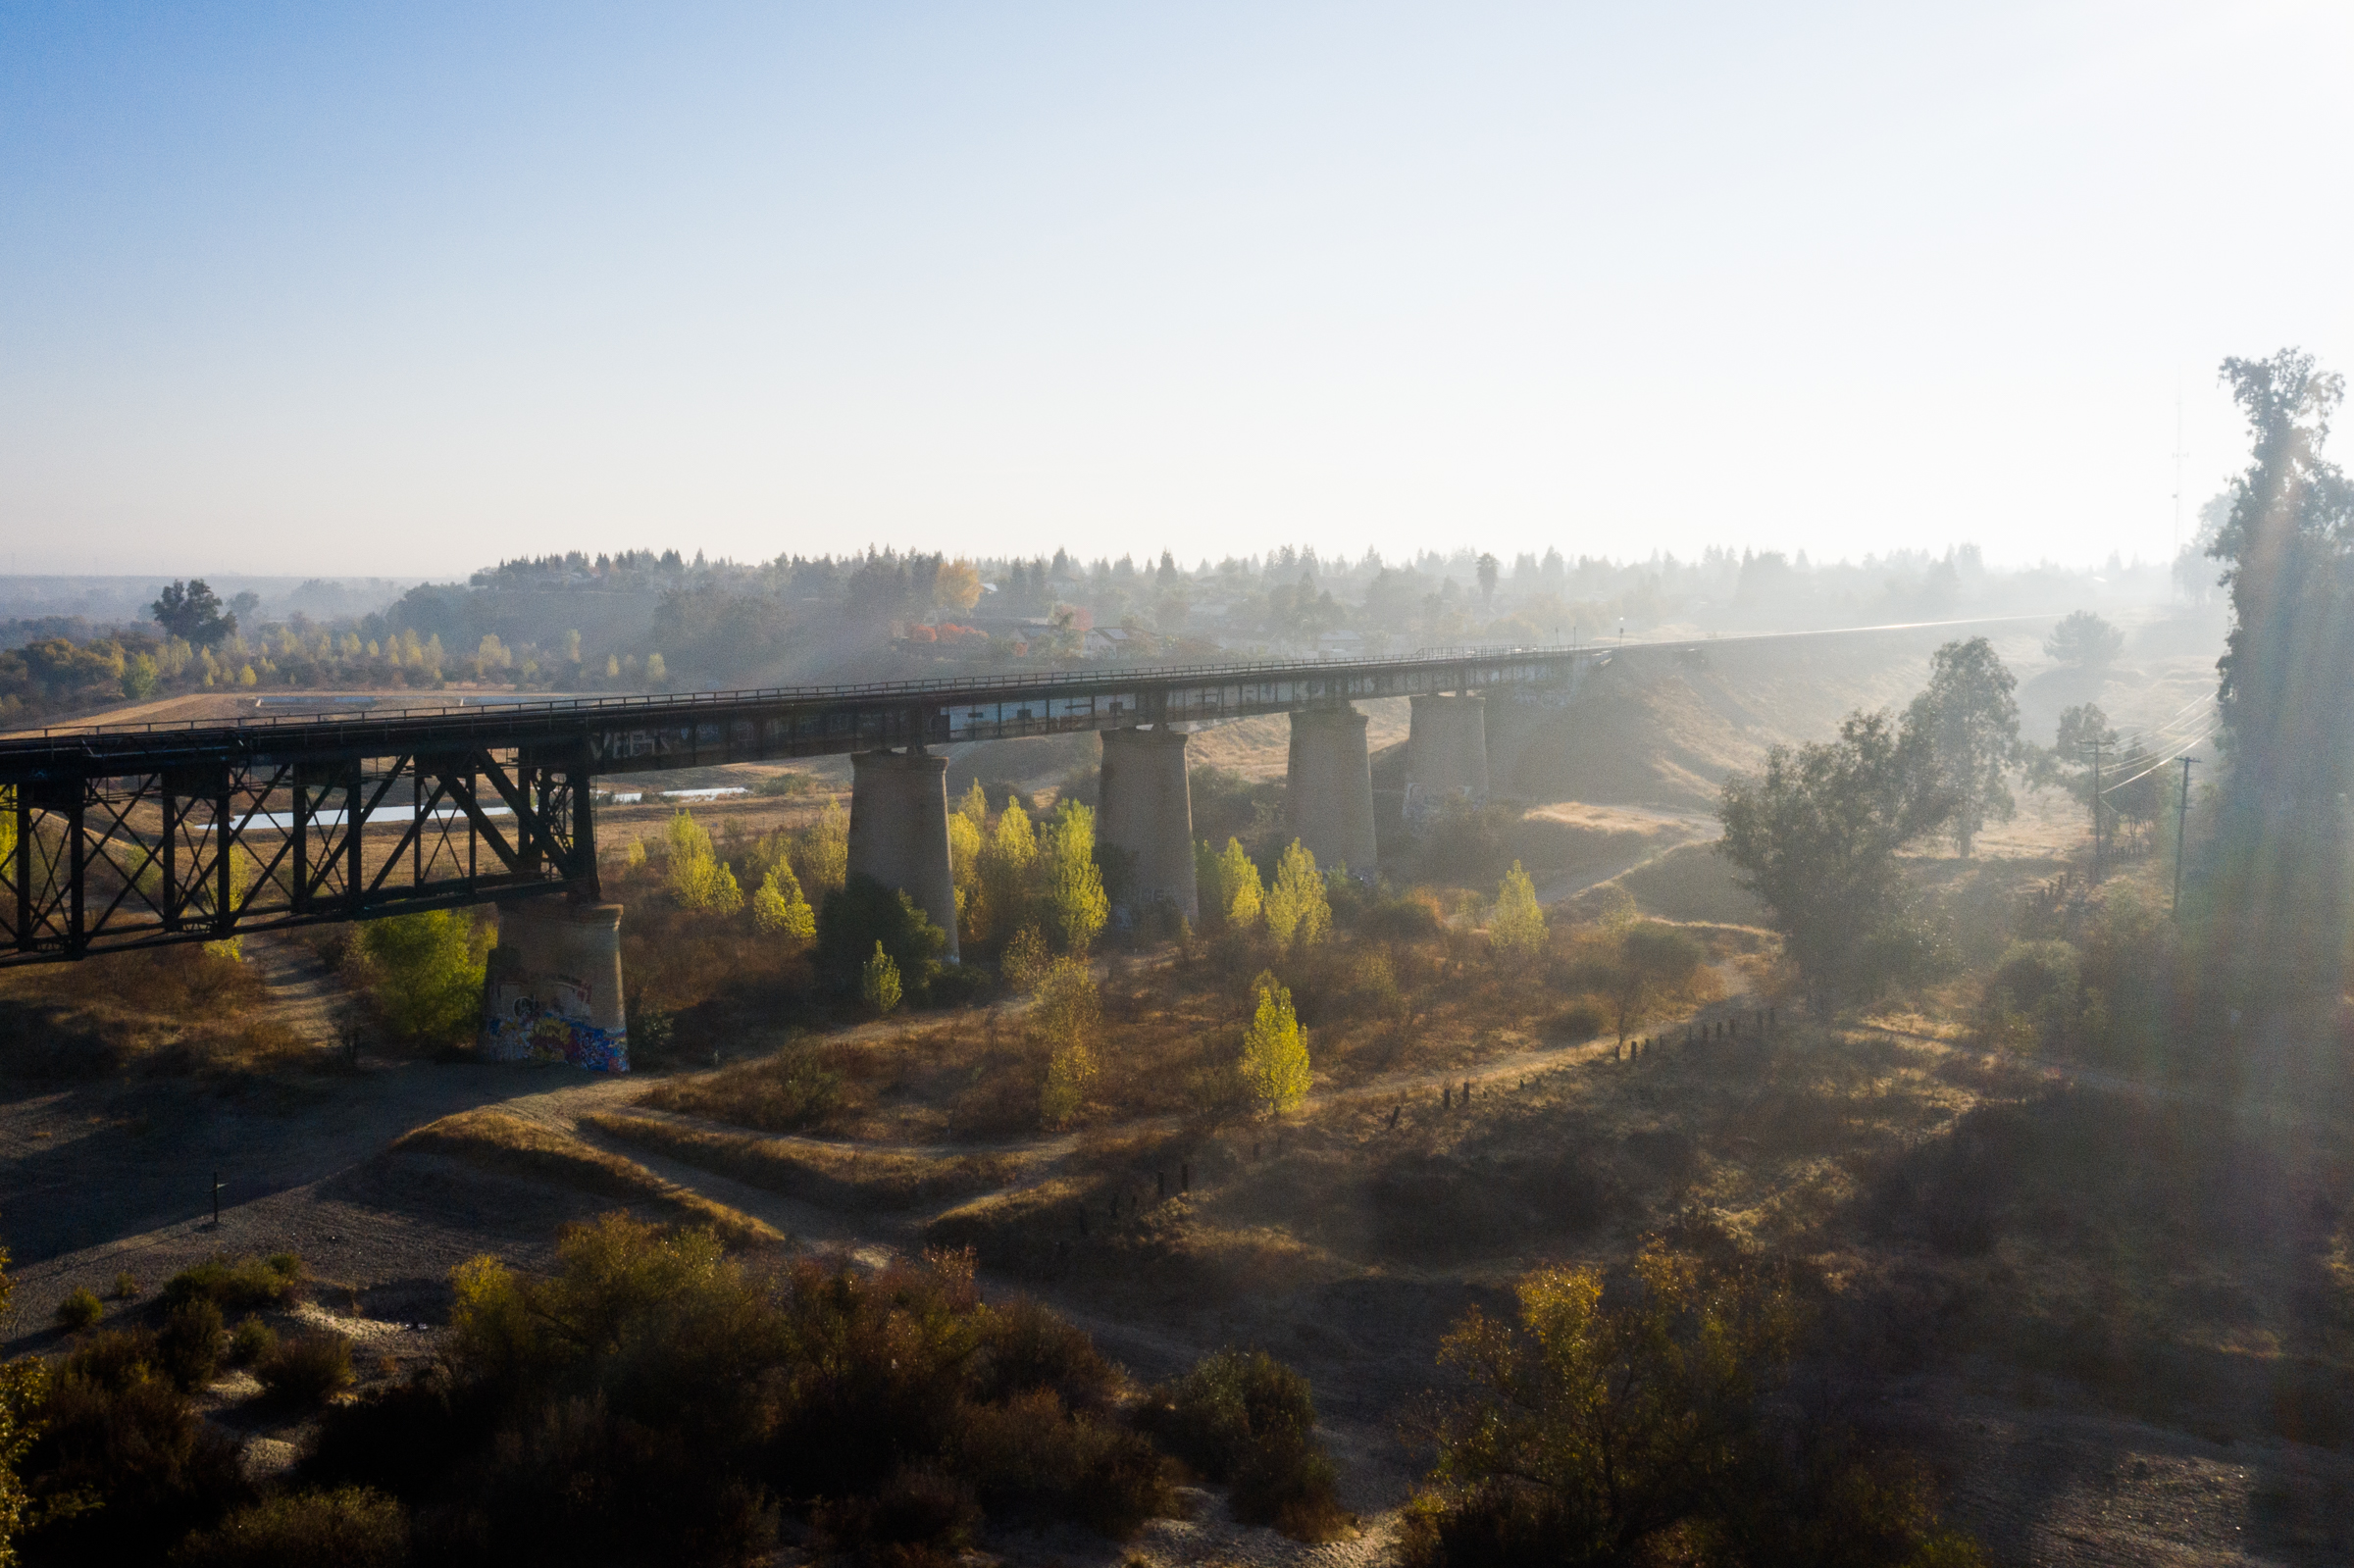 Morning fog lifts from the the San Joaquin River valley